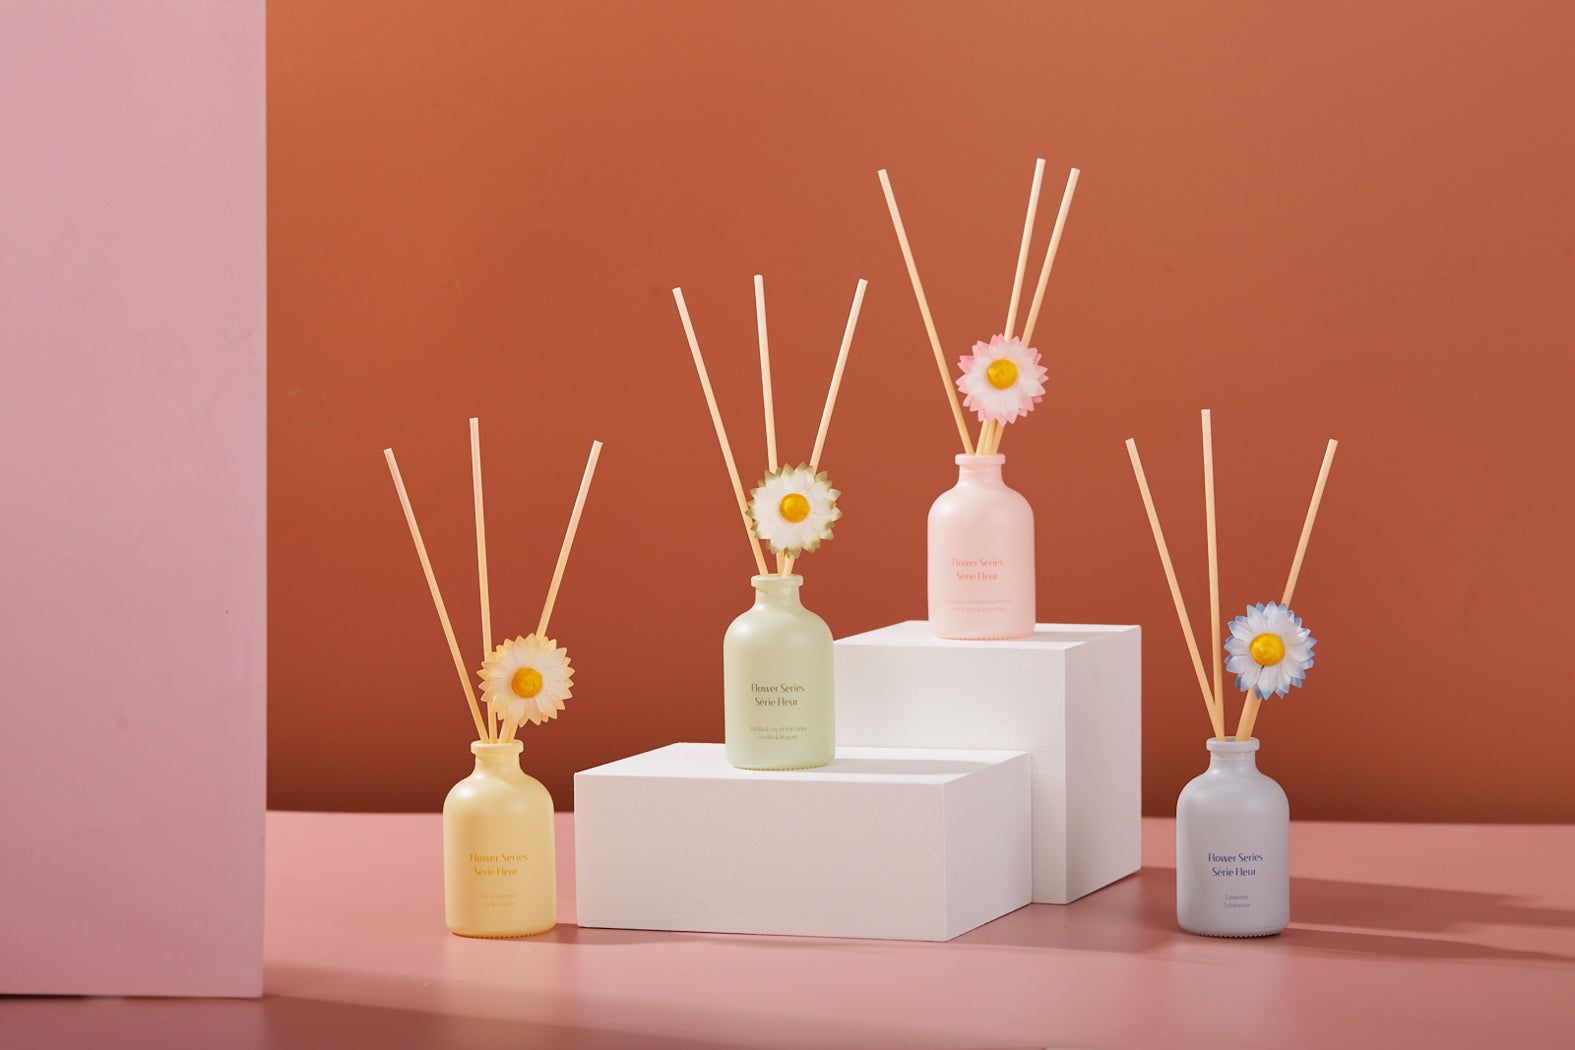 MINISO FLOWER SERIES-REED DIFFUSER ( TUBEROSE ) 2011534912101 SCENT DIFFUSER